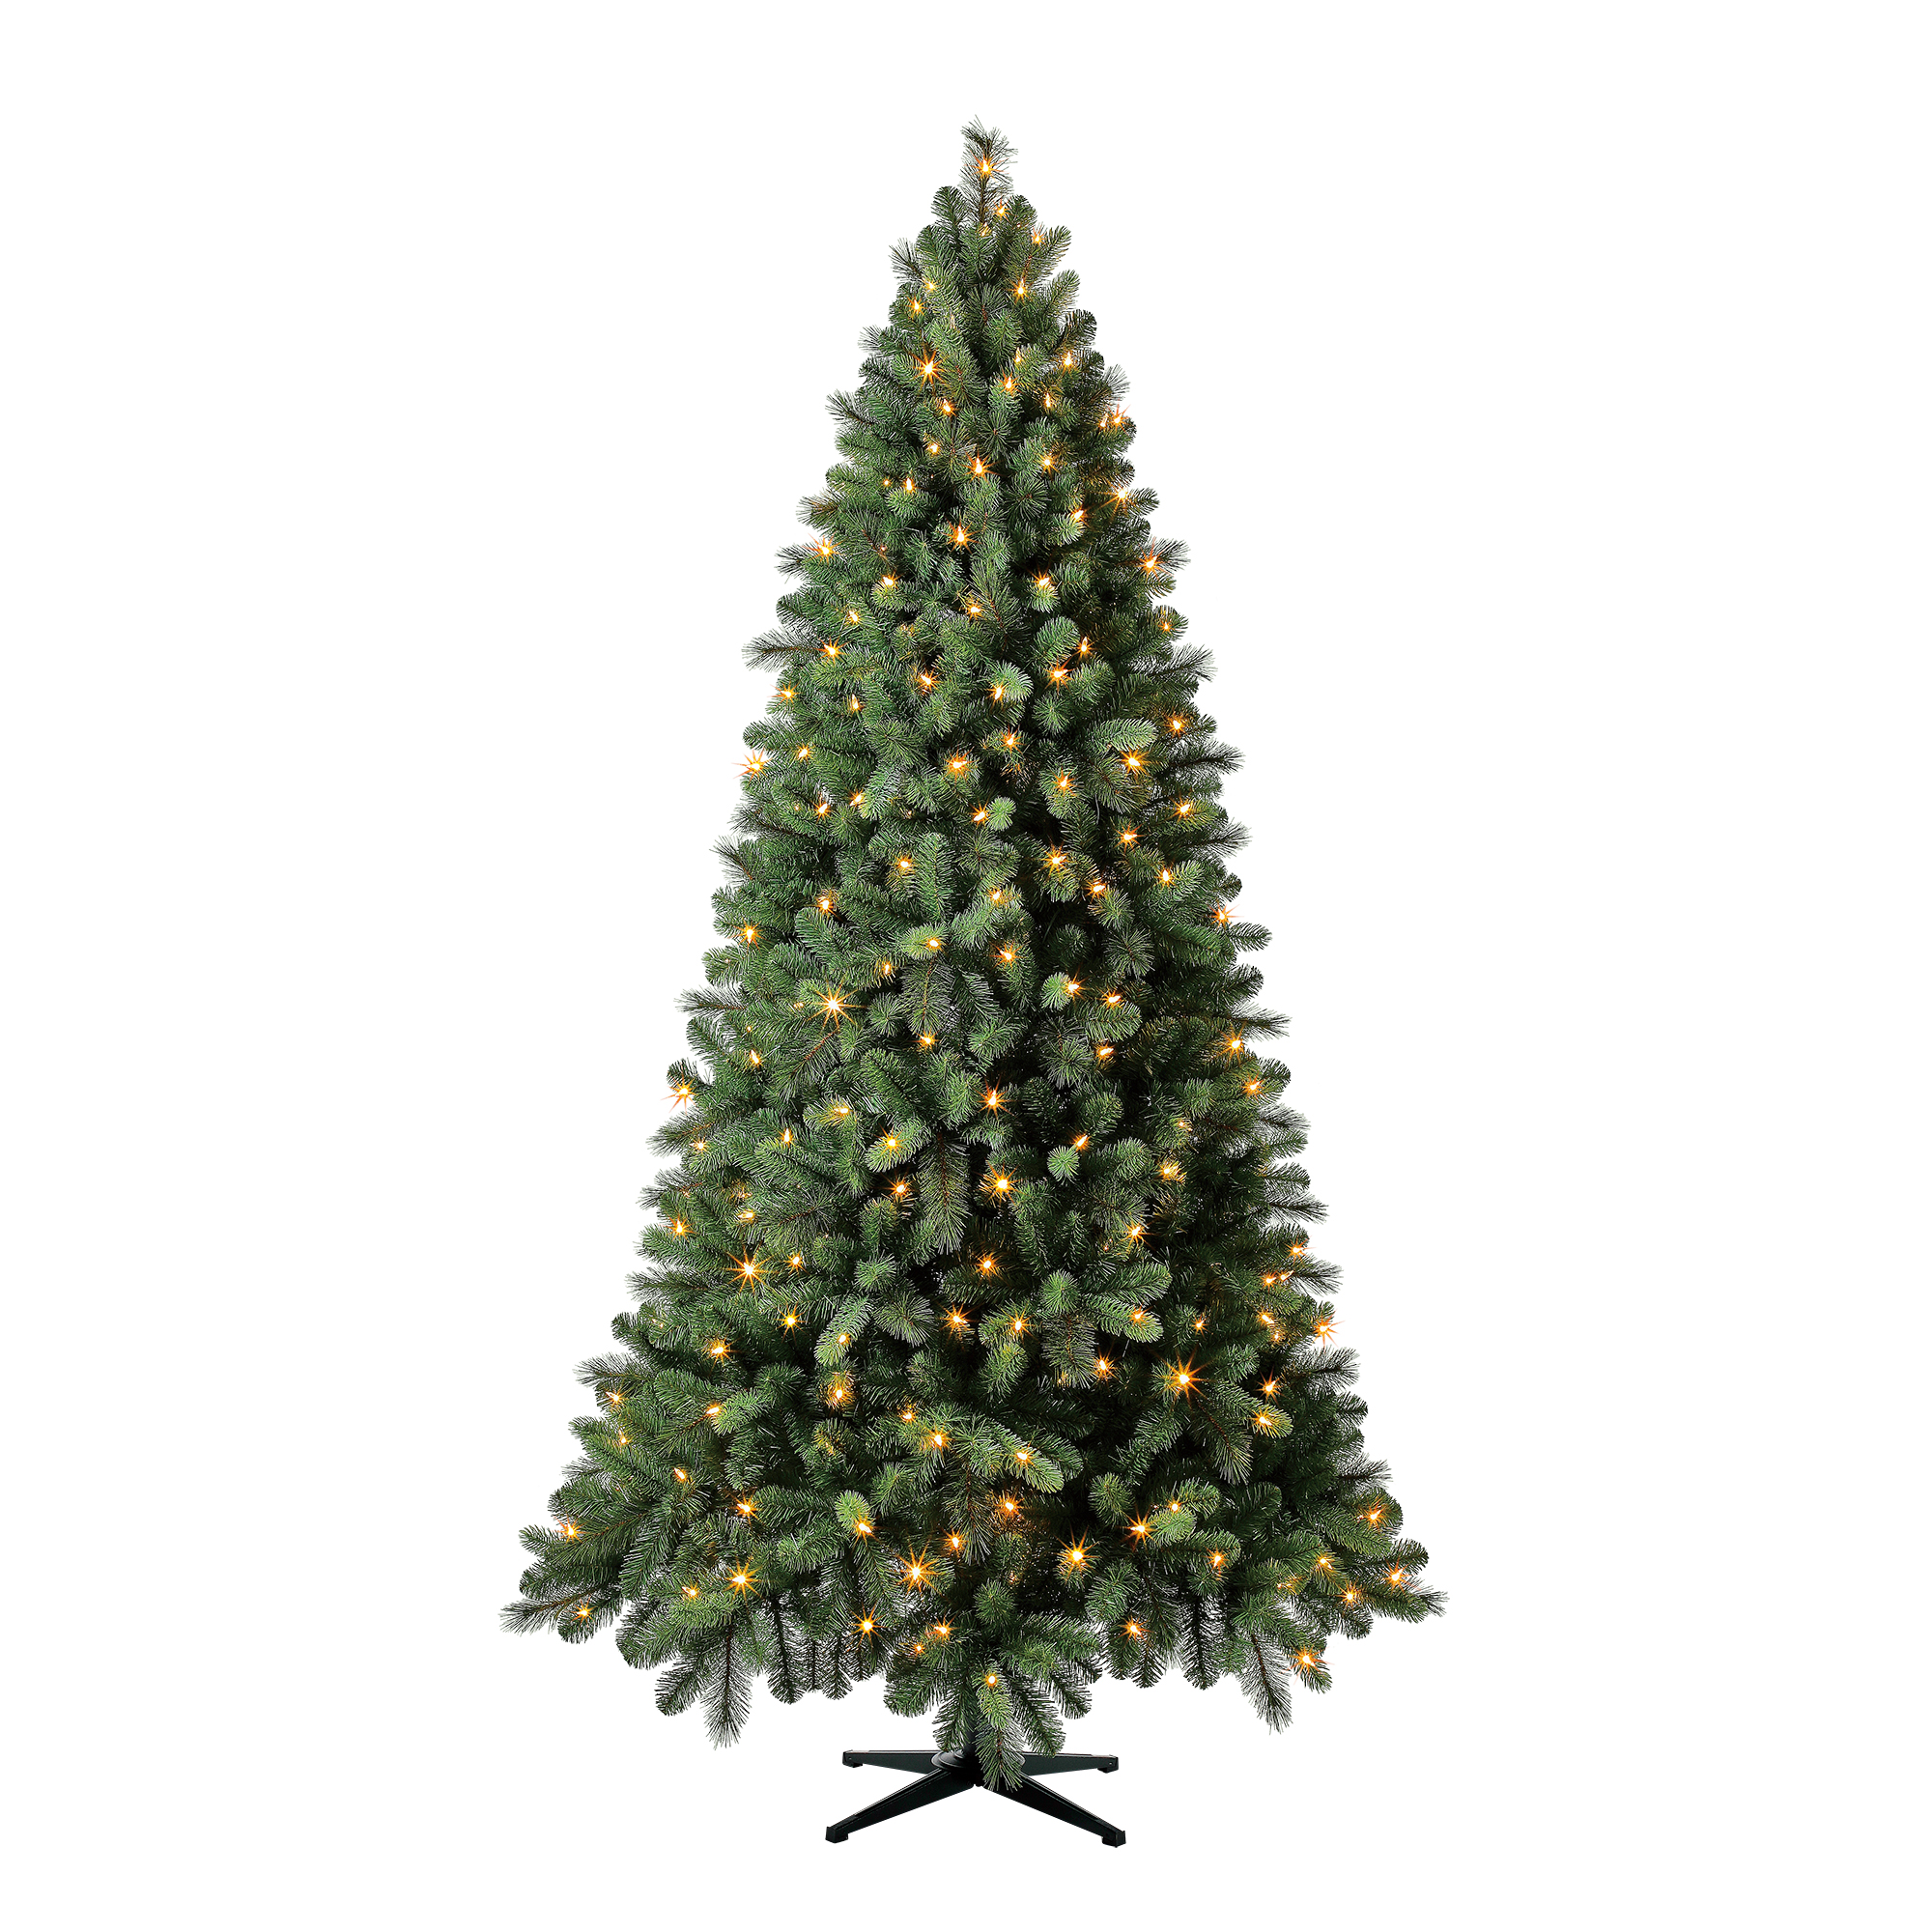 Holiday Time Multi-color Prelit LED Green Decorated Spruce Artificial Christmas Tree, with Color Changing Lights 7.5' - image 1 of 8